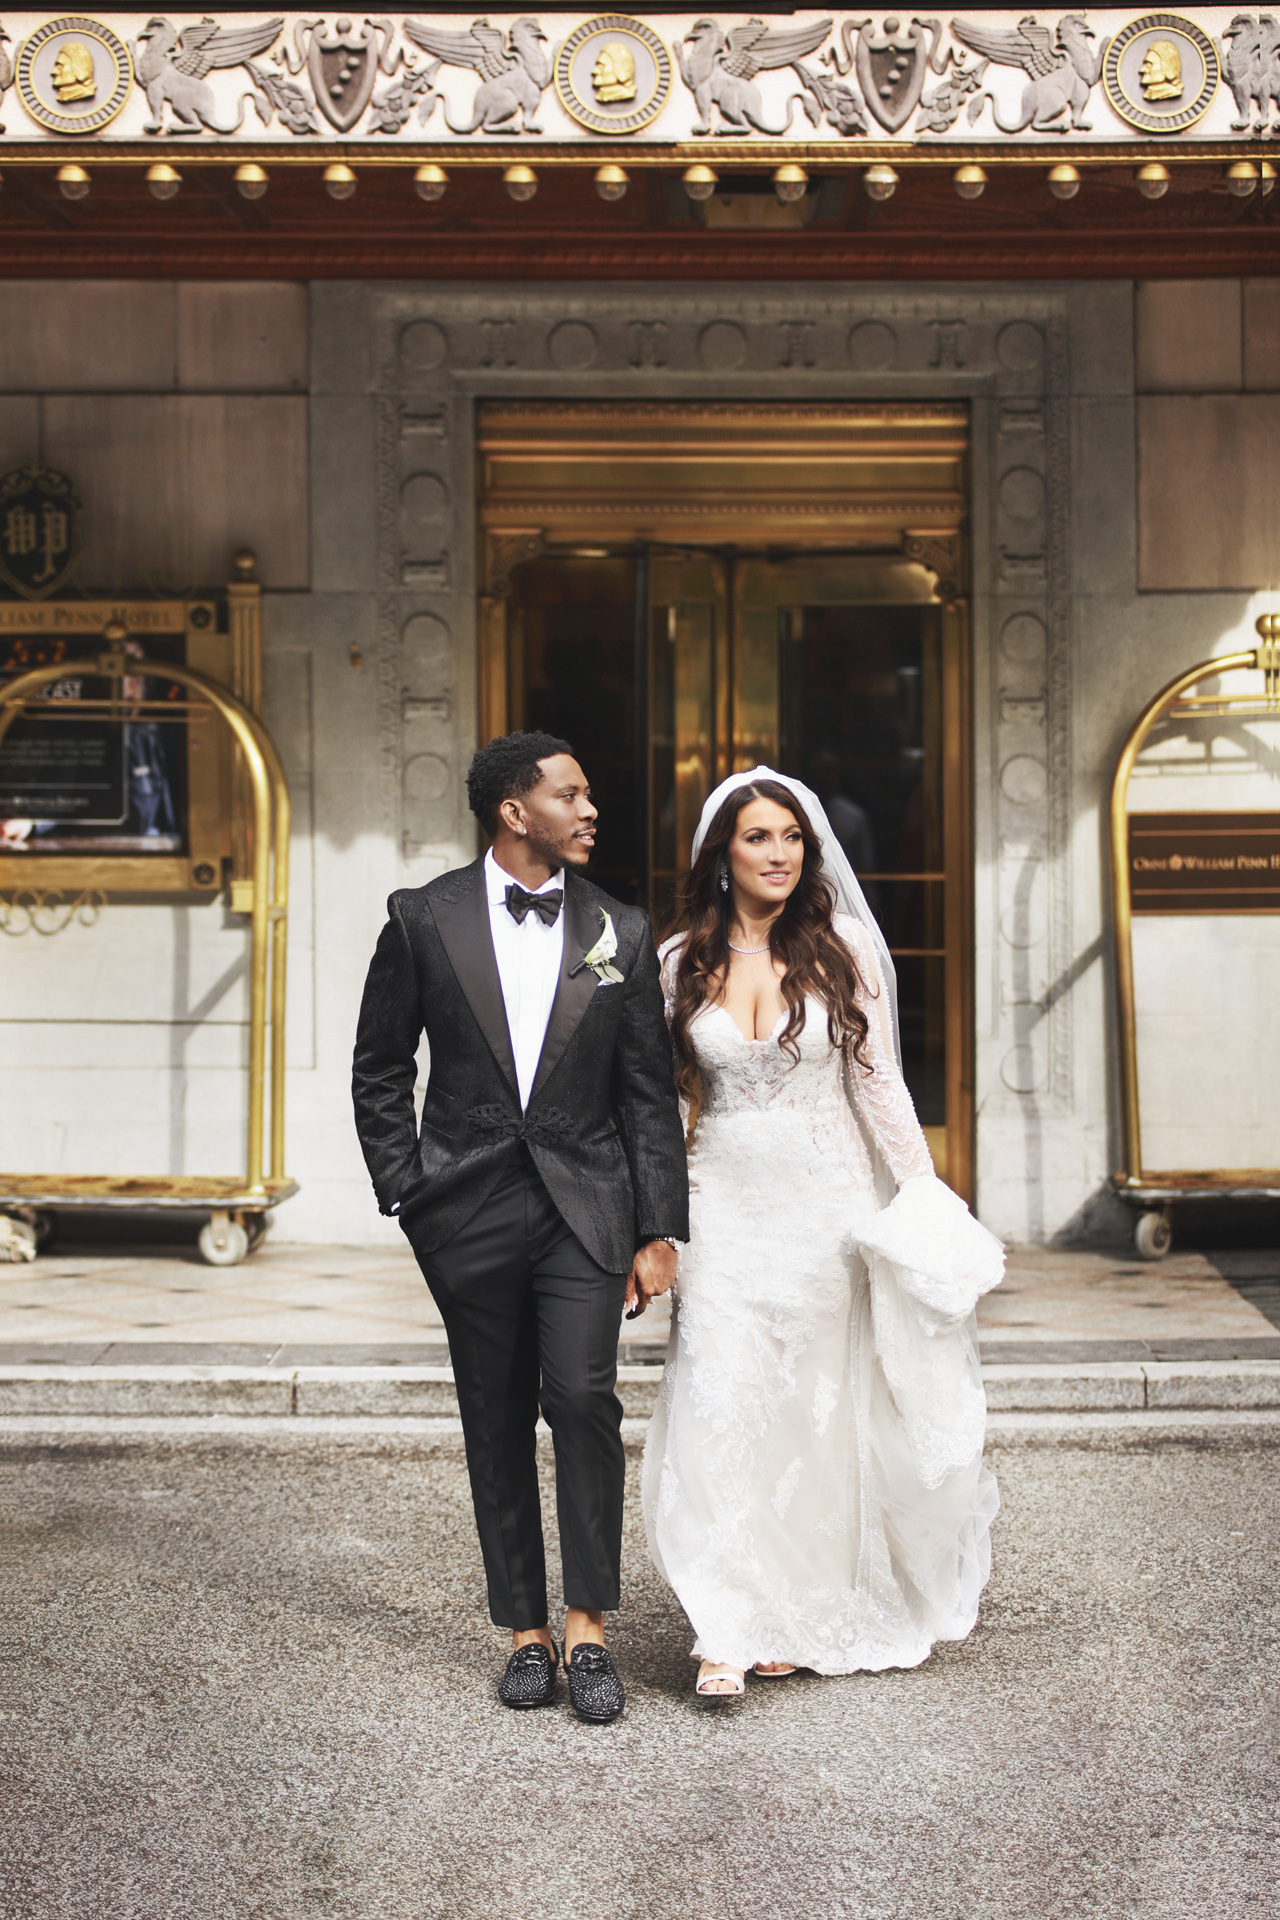 A newlywed couple exit the Omni William Penn Hotel in Pittsburgh, PA